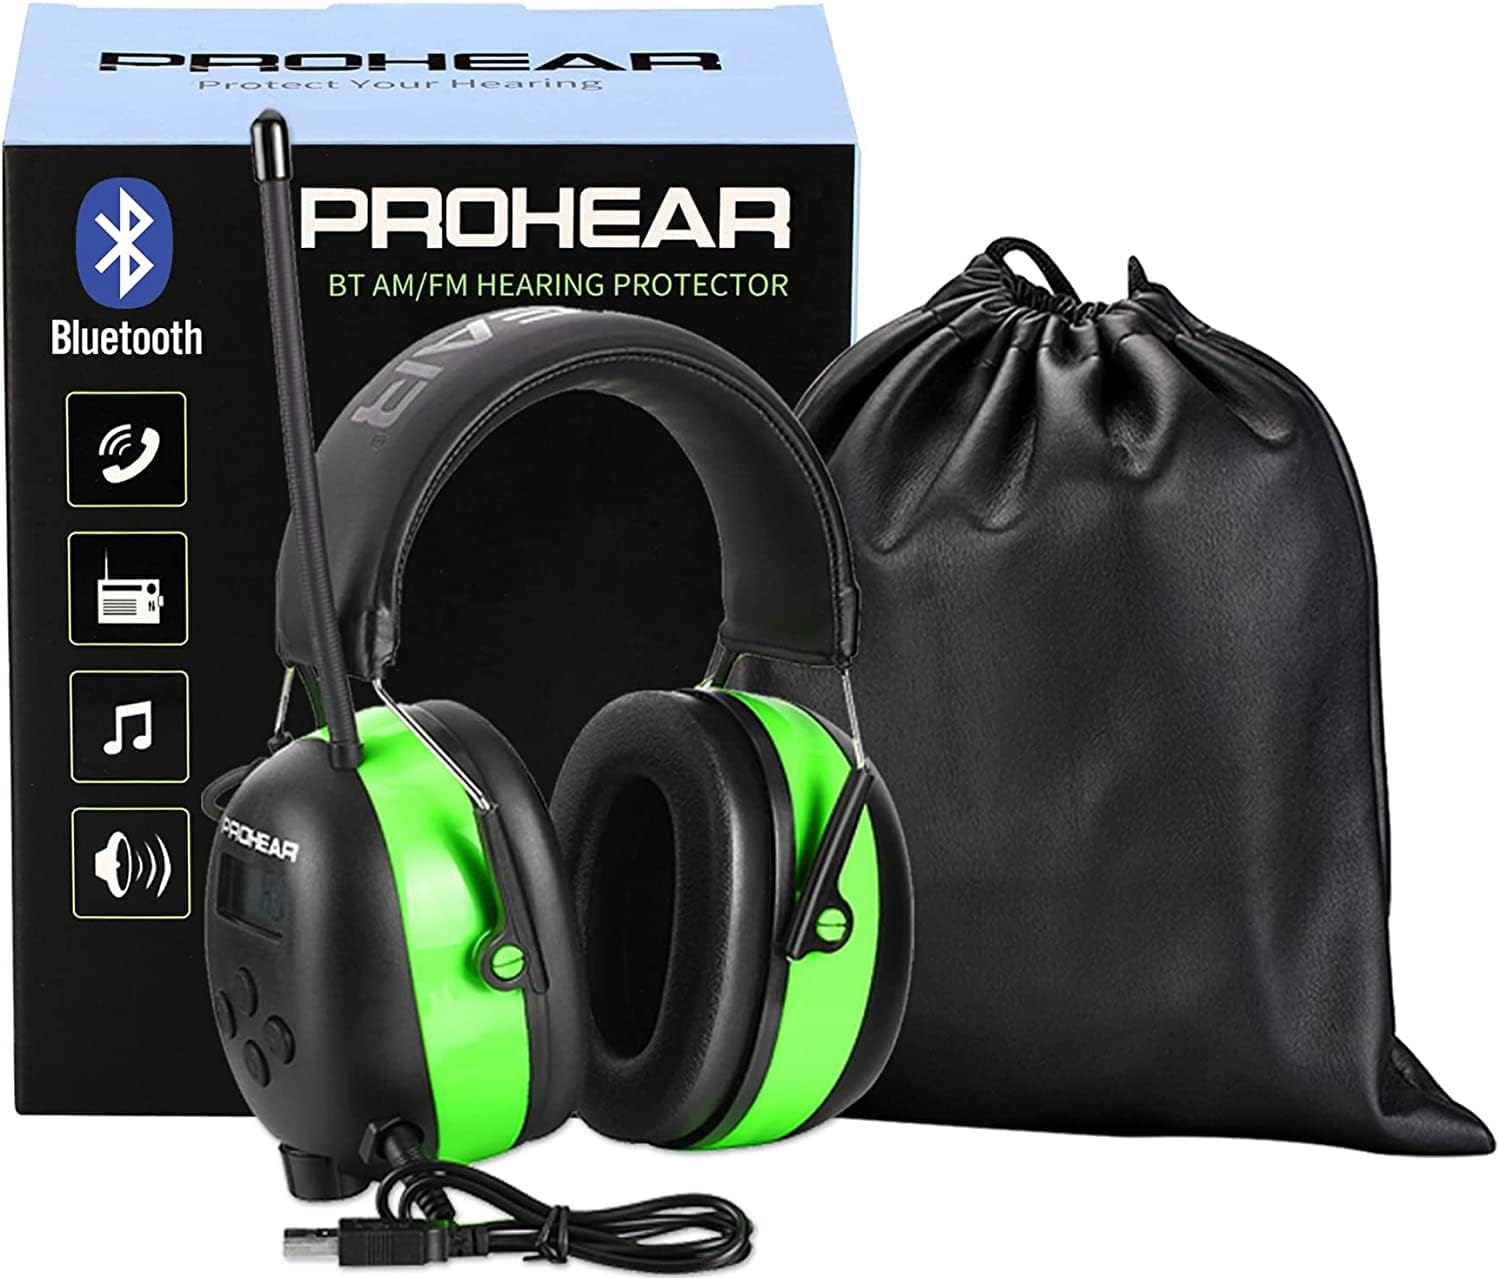 PROHEAR 033 Upgraded 5.1 Bluetooth Hearing Protection AM FM Radio Headphones, Noise Reduction Safety Earmuffs with Rechargeable 2000 mA